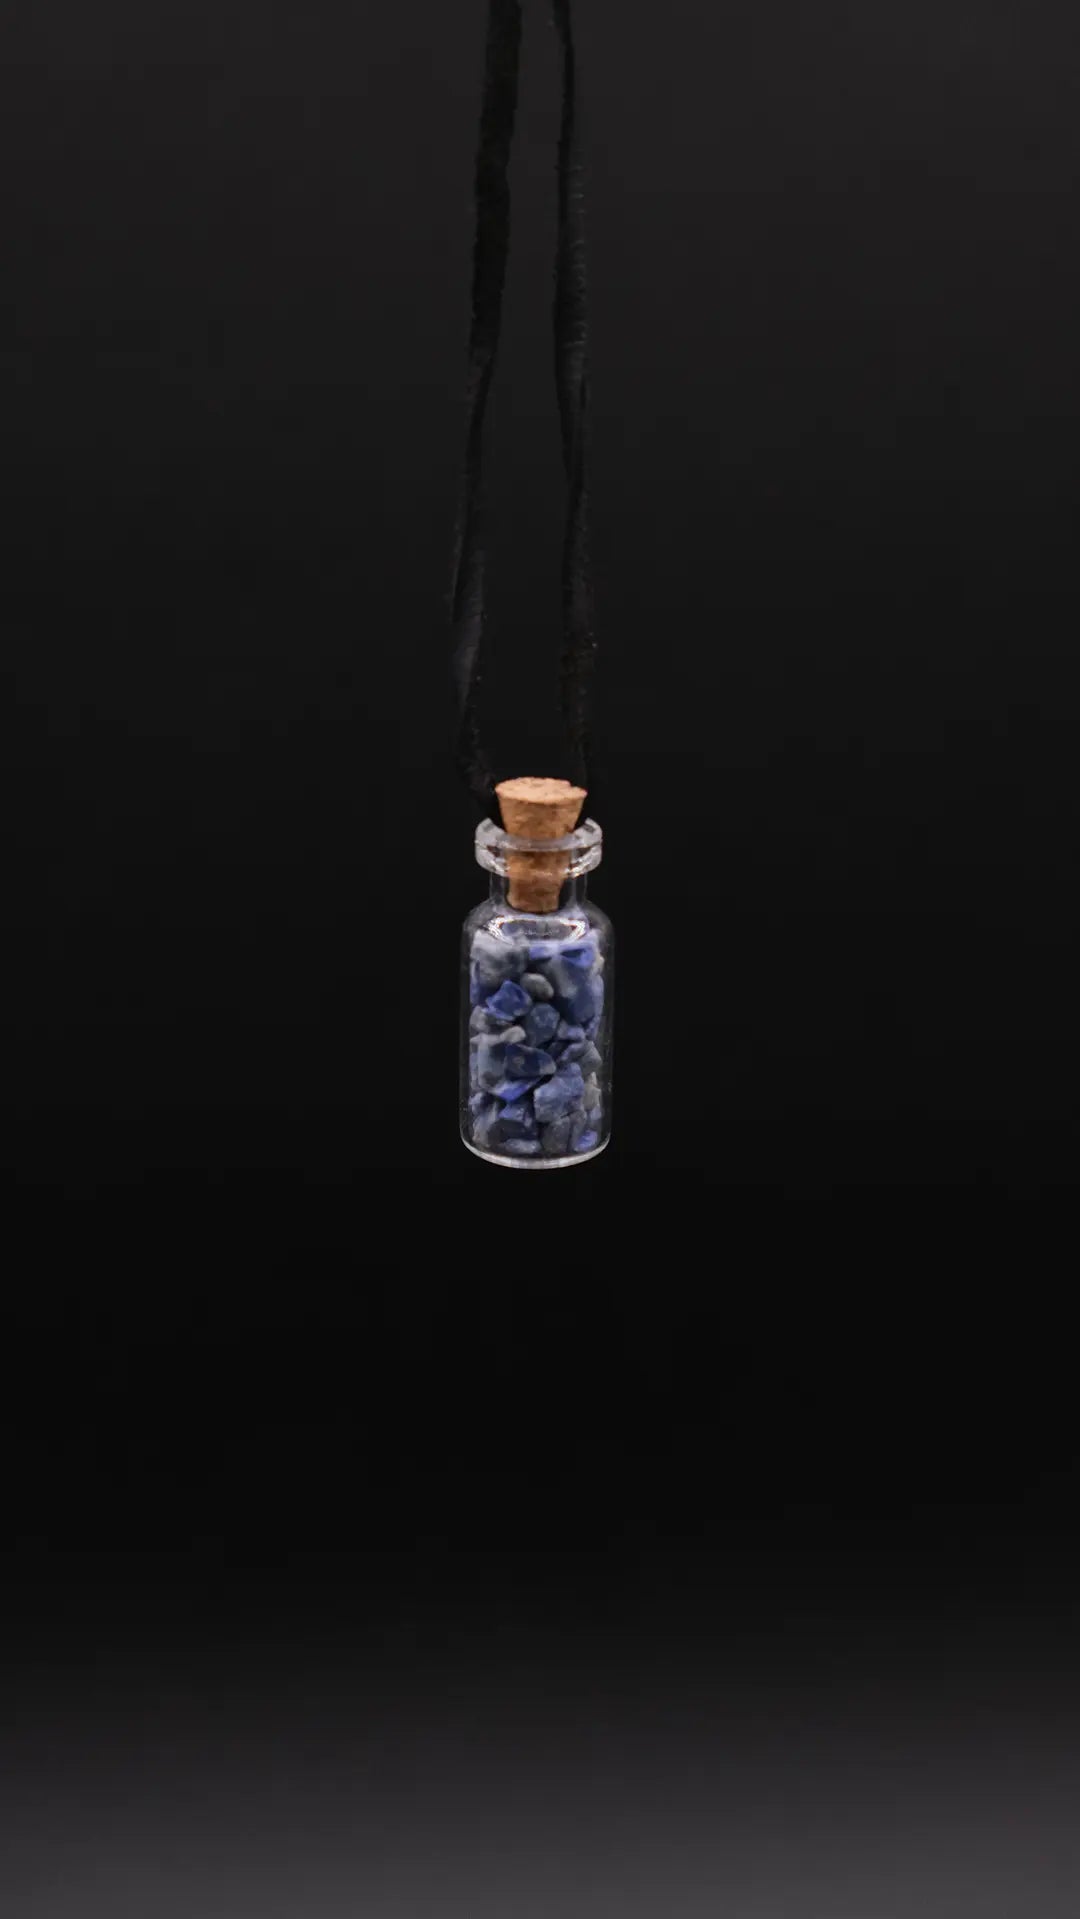 pendant made with a little glass bottle filled with lapis lazuli shards placed over a black background